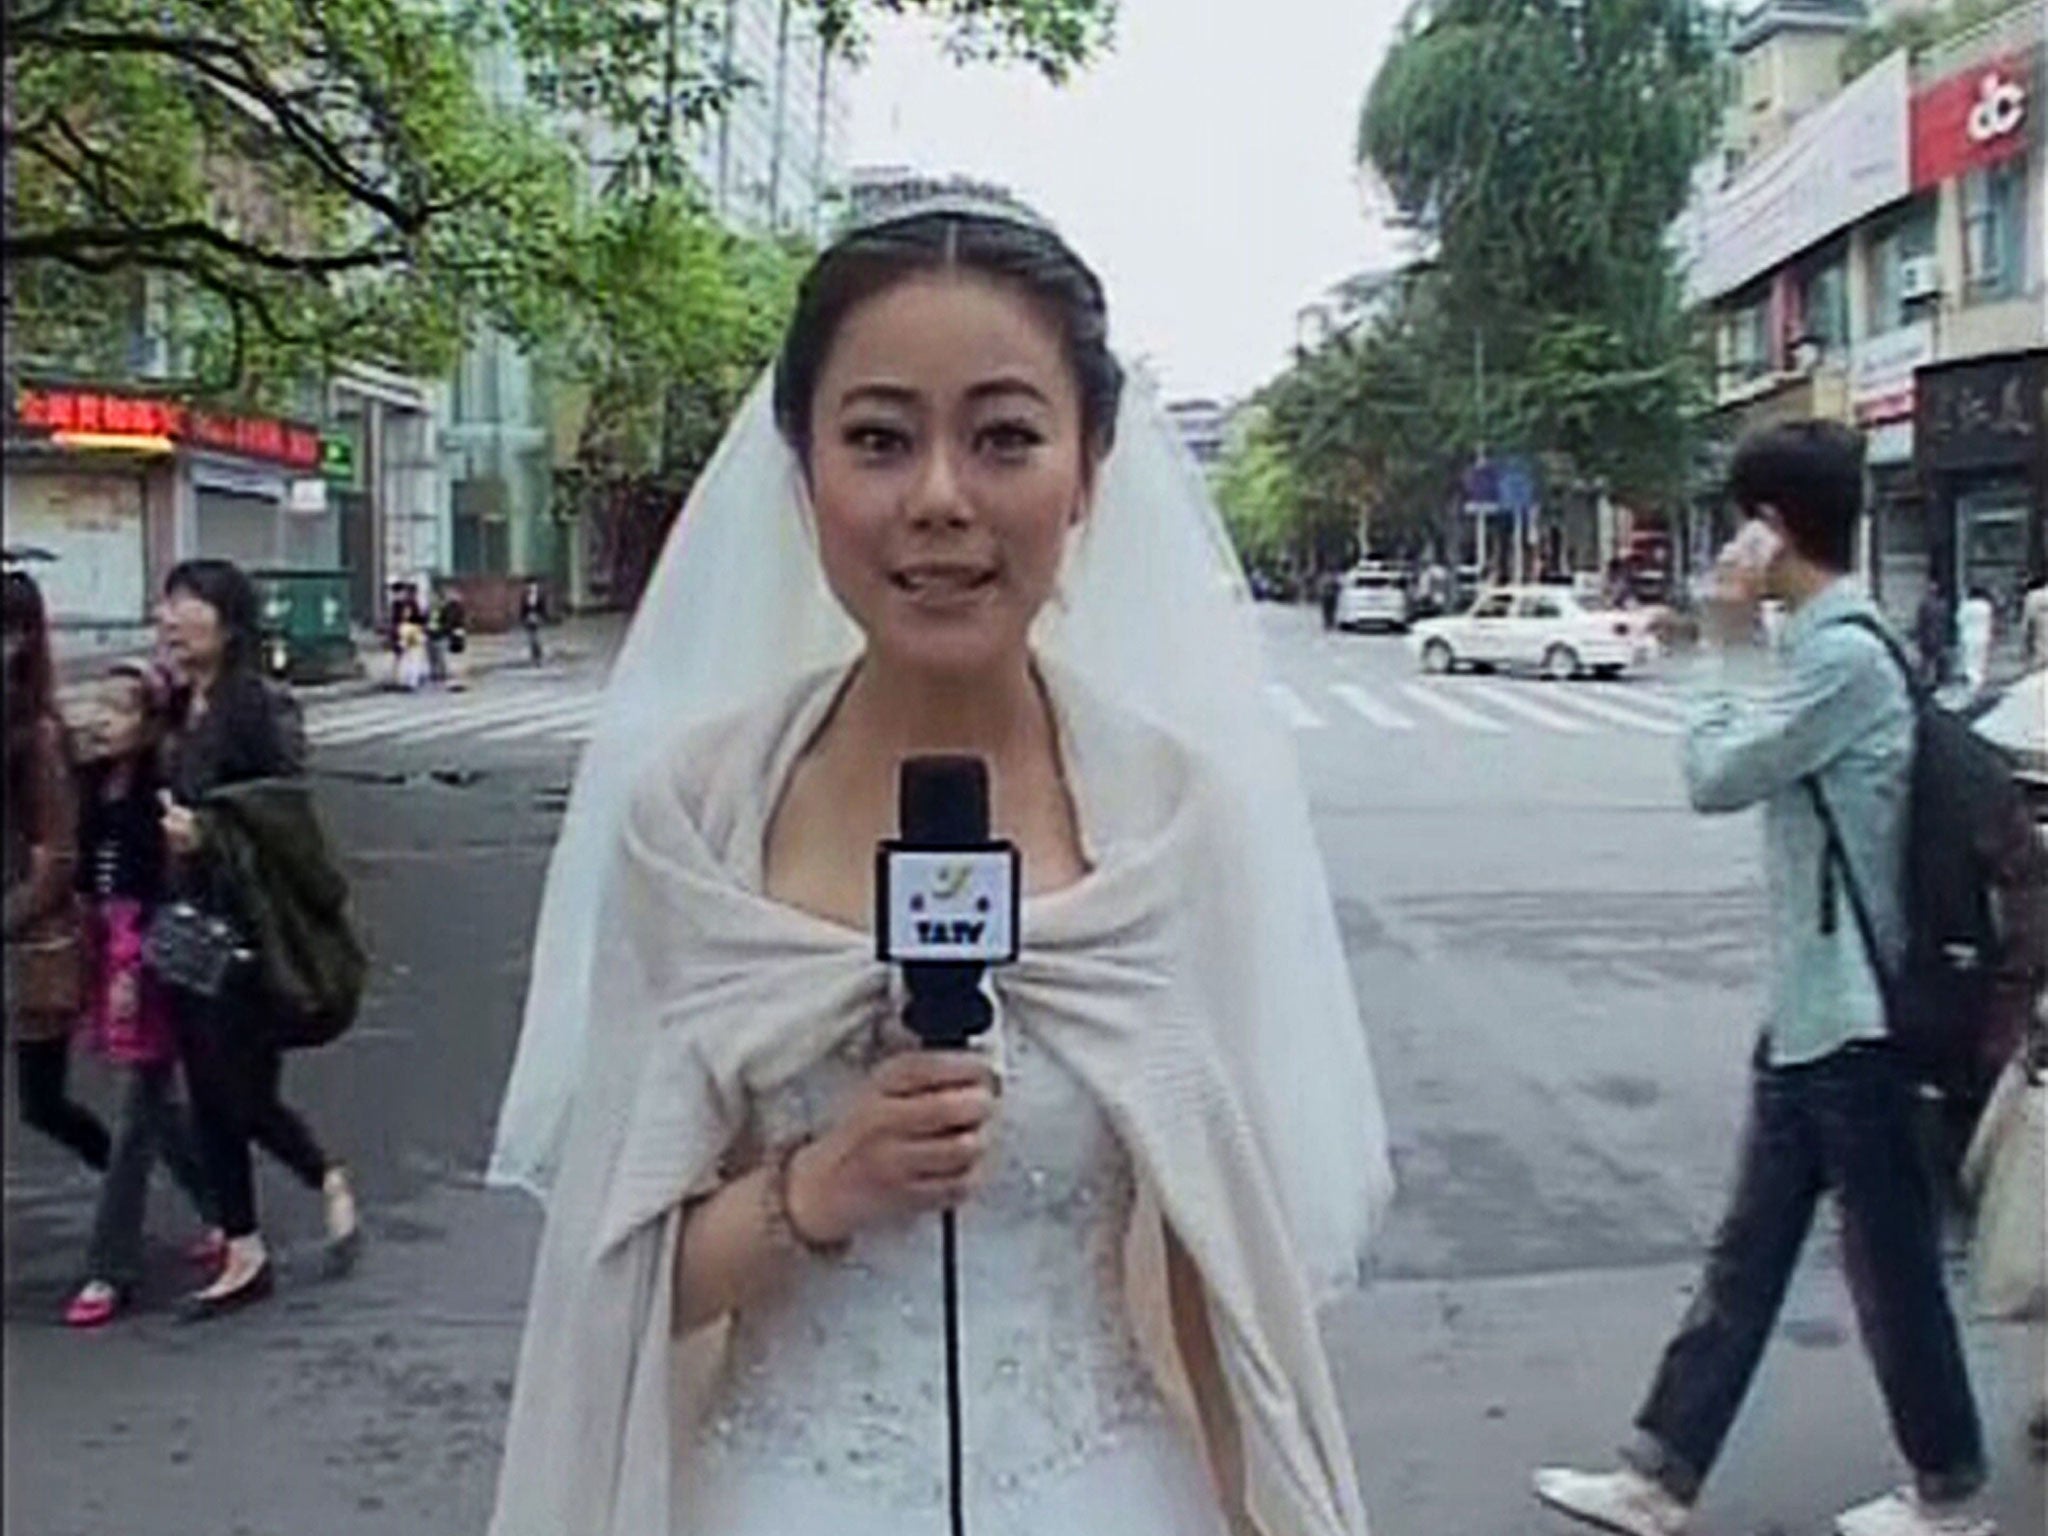 Journalist Chen Ying reports dressed in her wedding gown after an earthquake hit Ya'an, Sichuan province. Chen was having make-up applied before her wedding ceremony when the earthquake struck, and carried on with the ceremony after a quick report on the